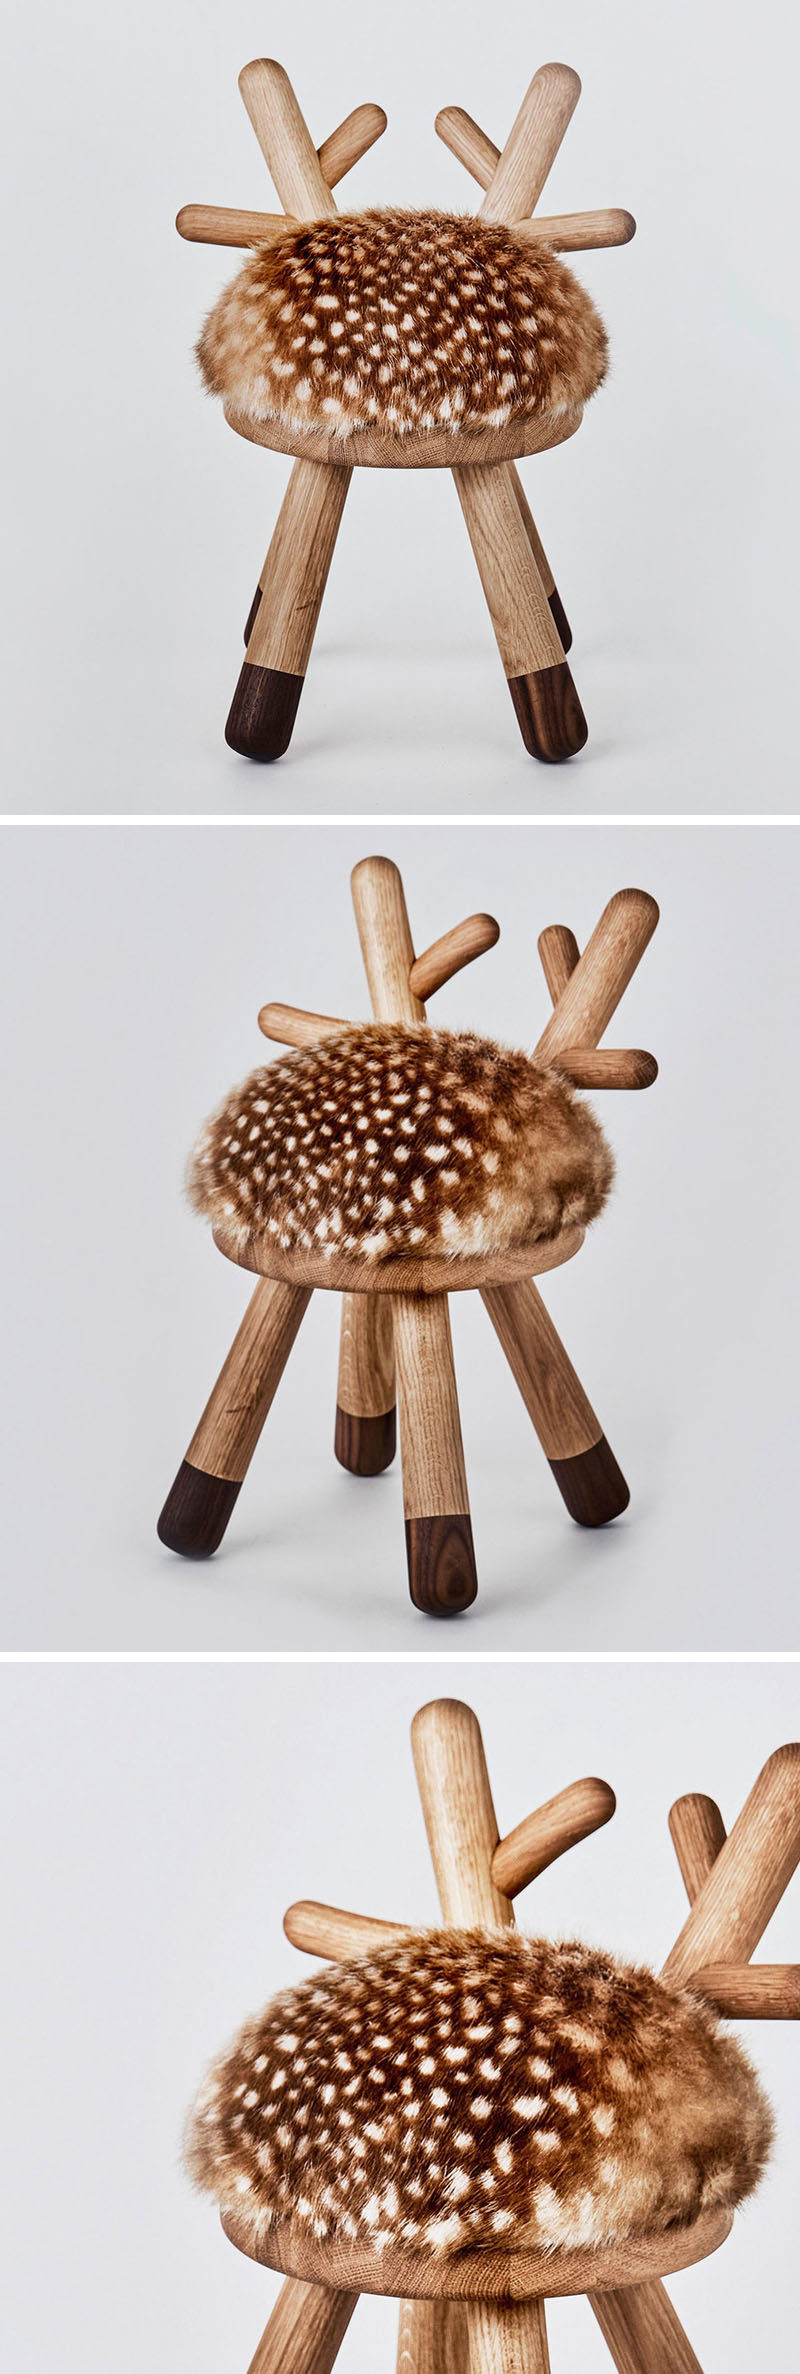 Japanese designer Takeshi Sawada, has designed Bambi as part of a collection of quirky farm animal inspired stools for EO - Elements Optimal.